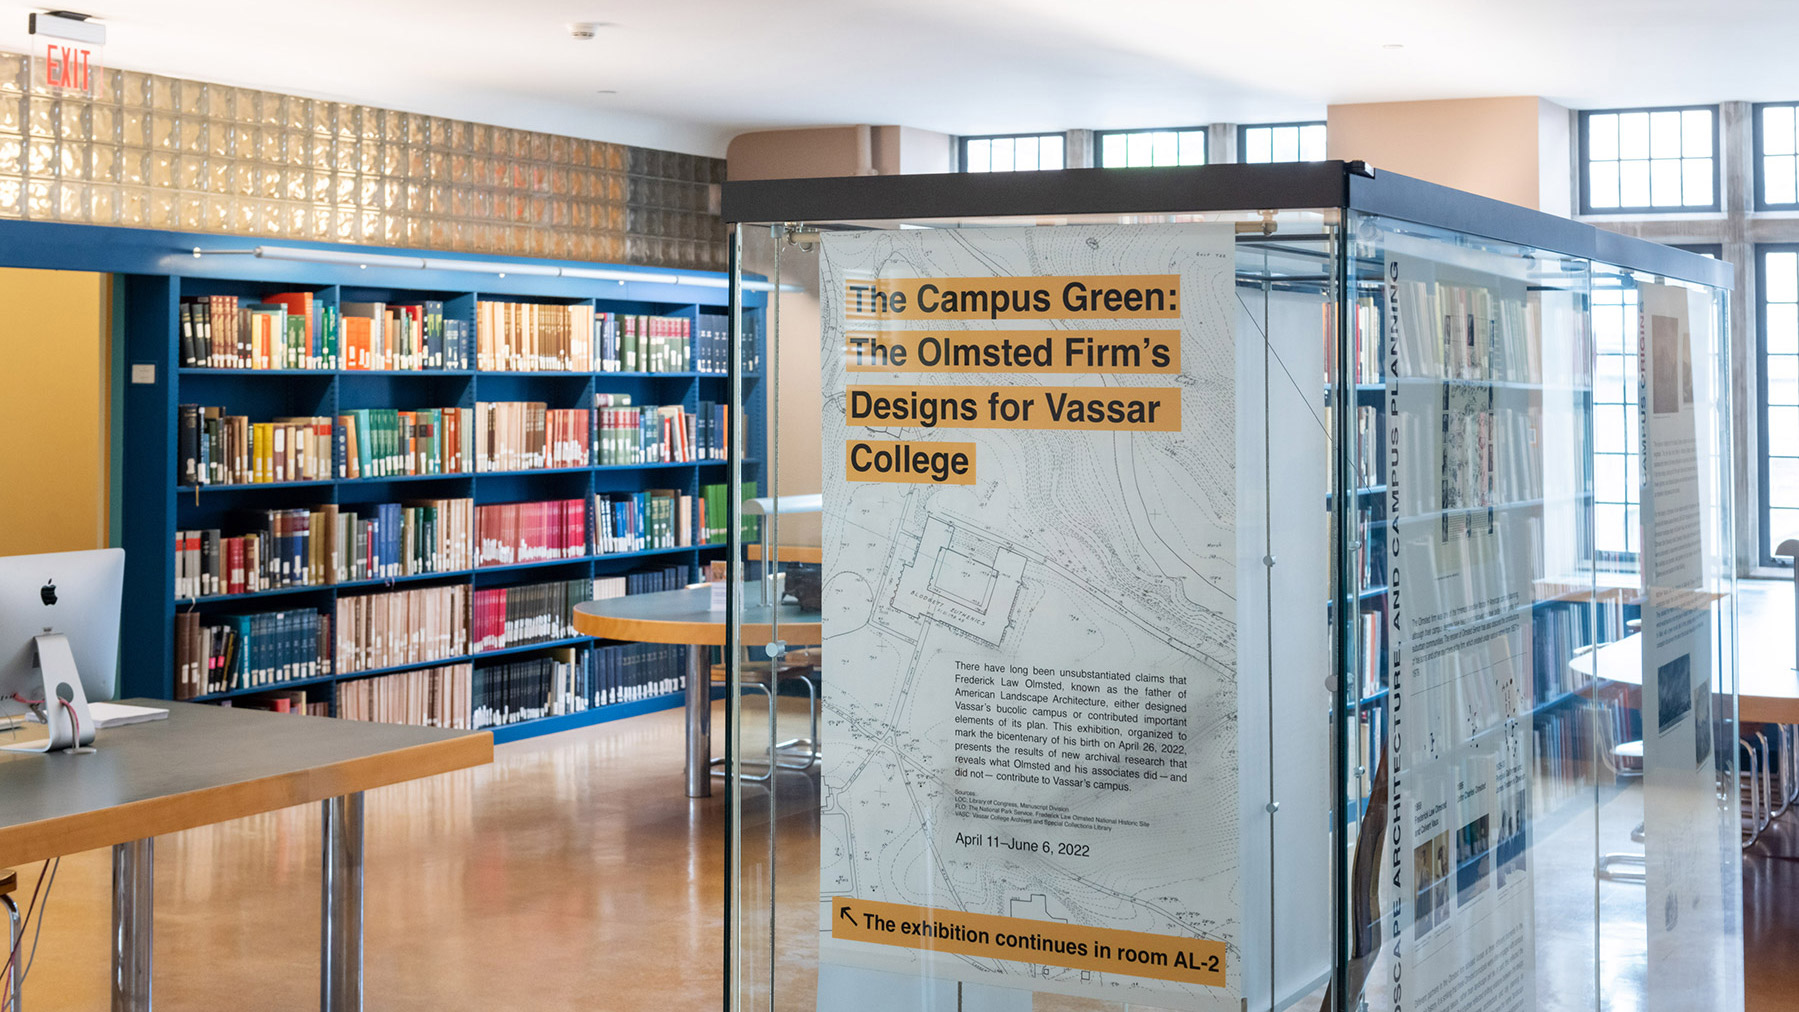 The exhibition, set in Vassar’s Art Library, is part of a series focusing on the history, preservation, and planning of the Vassar campus, organized by the Vassar Art Department.